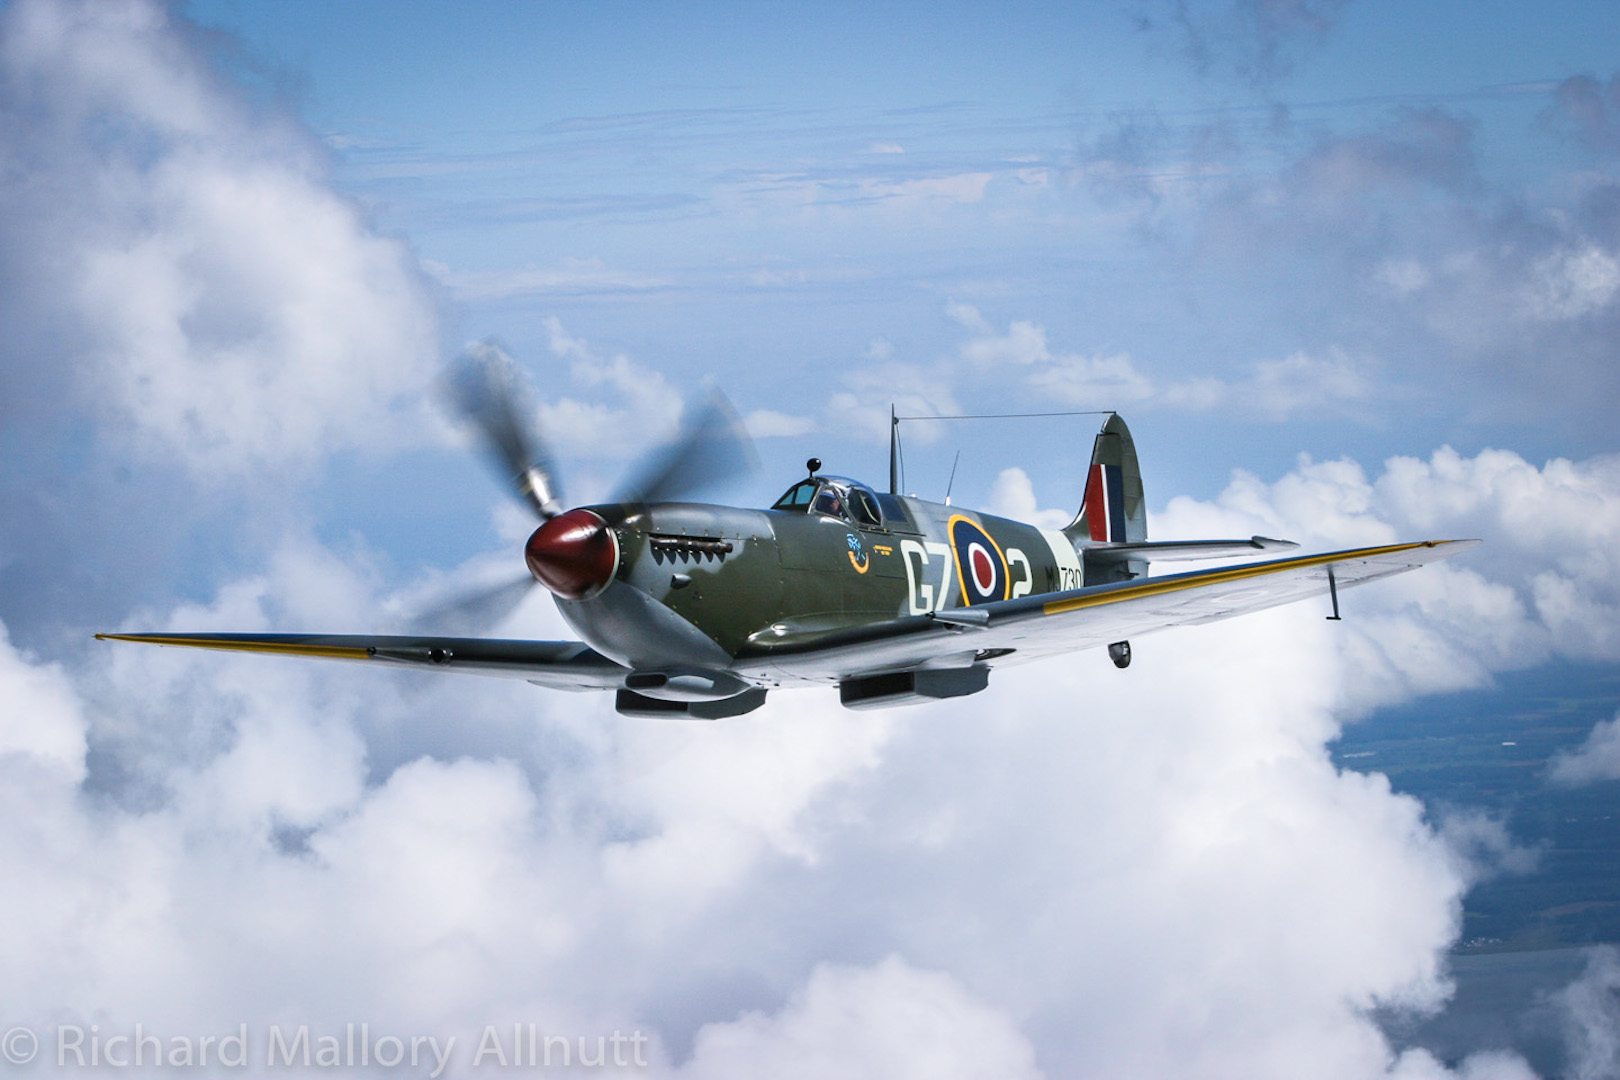 The Military Aviation Museum's Spitfire Mk IXe will be one of the special guest of the event. Image by Richard Mallory Allnutt.